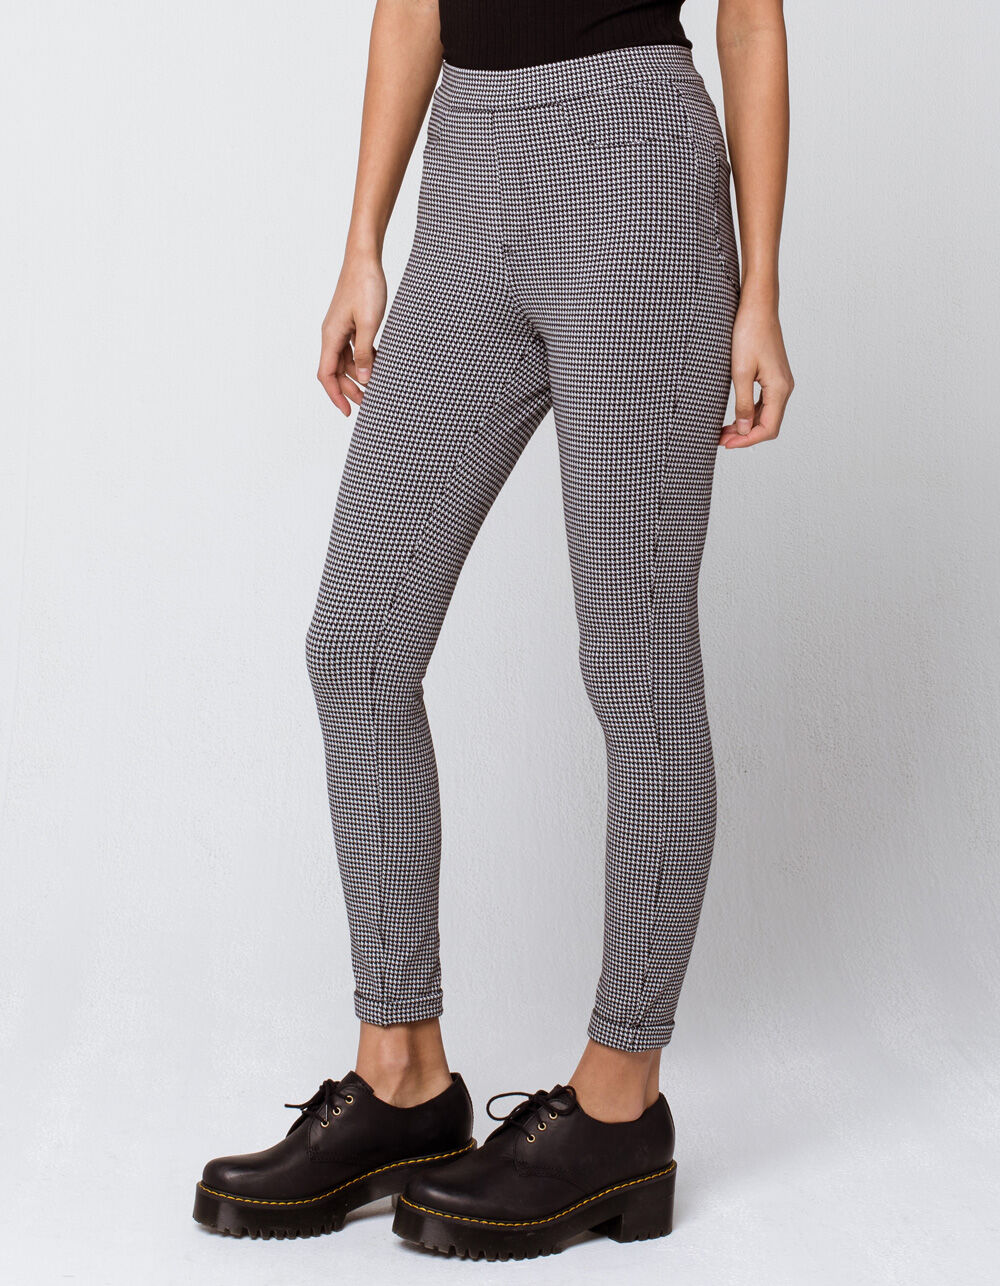 IVY & MAIN Houndstooth Womens Skinny Pants image number 2